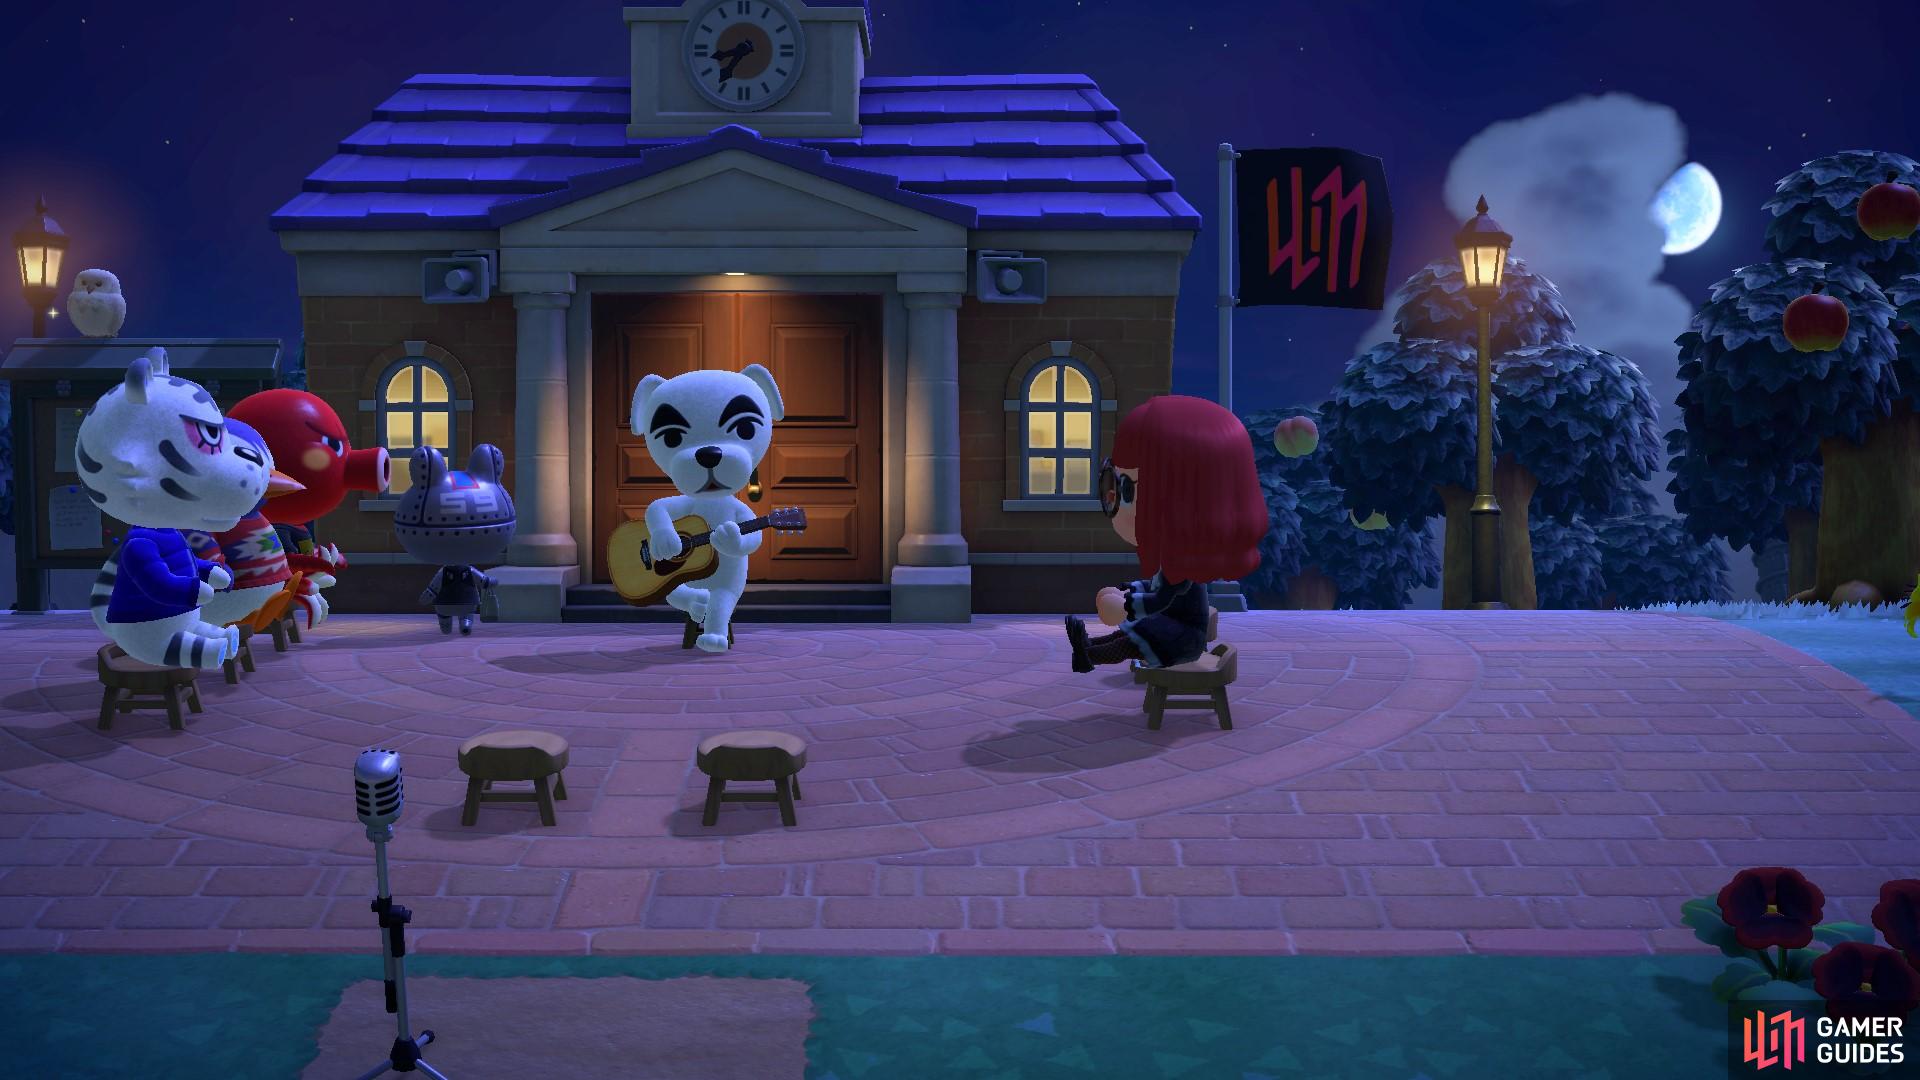 Throughout the day, your villagers will sit and have a listen to K.K.’s tunes.